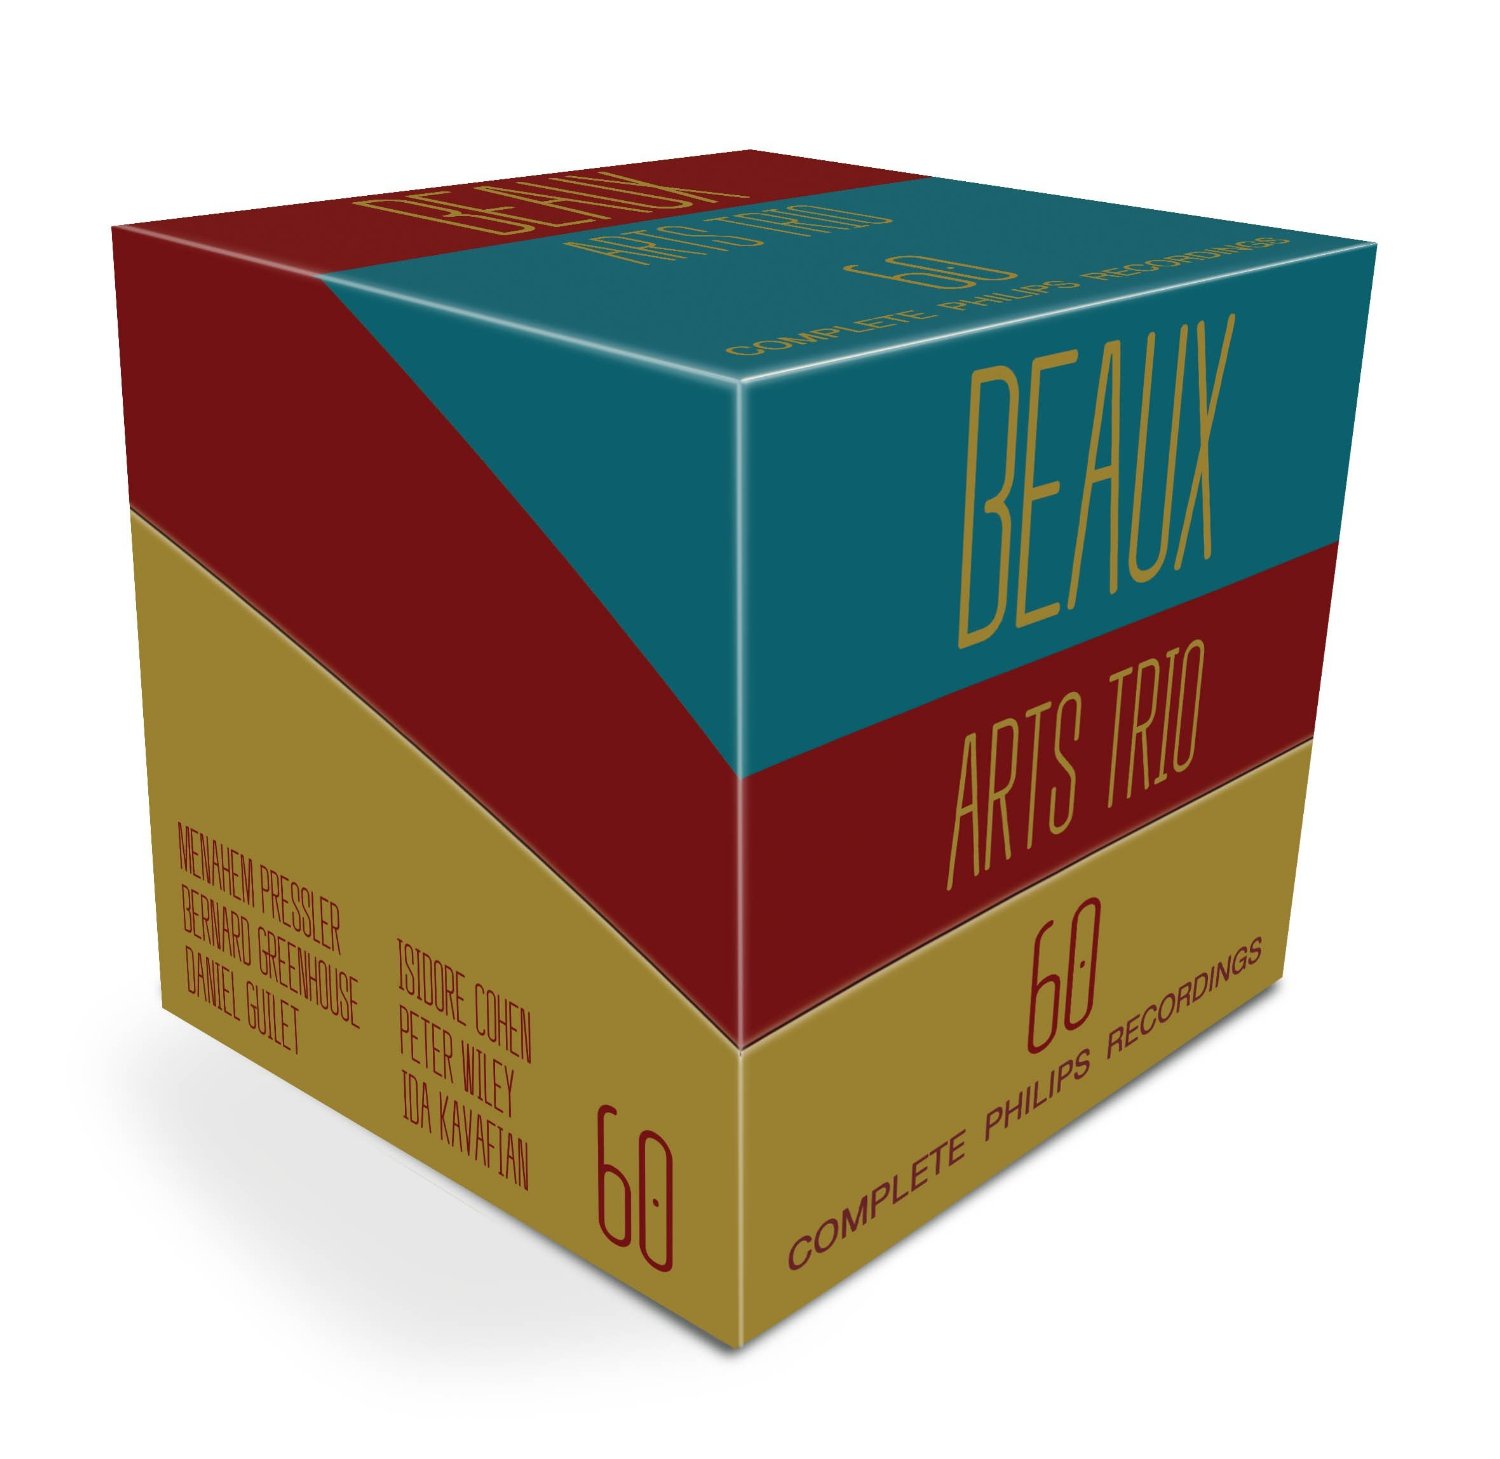 Big Boxes: The Beaux Arts Trio's Complete Philips Recordings 